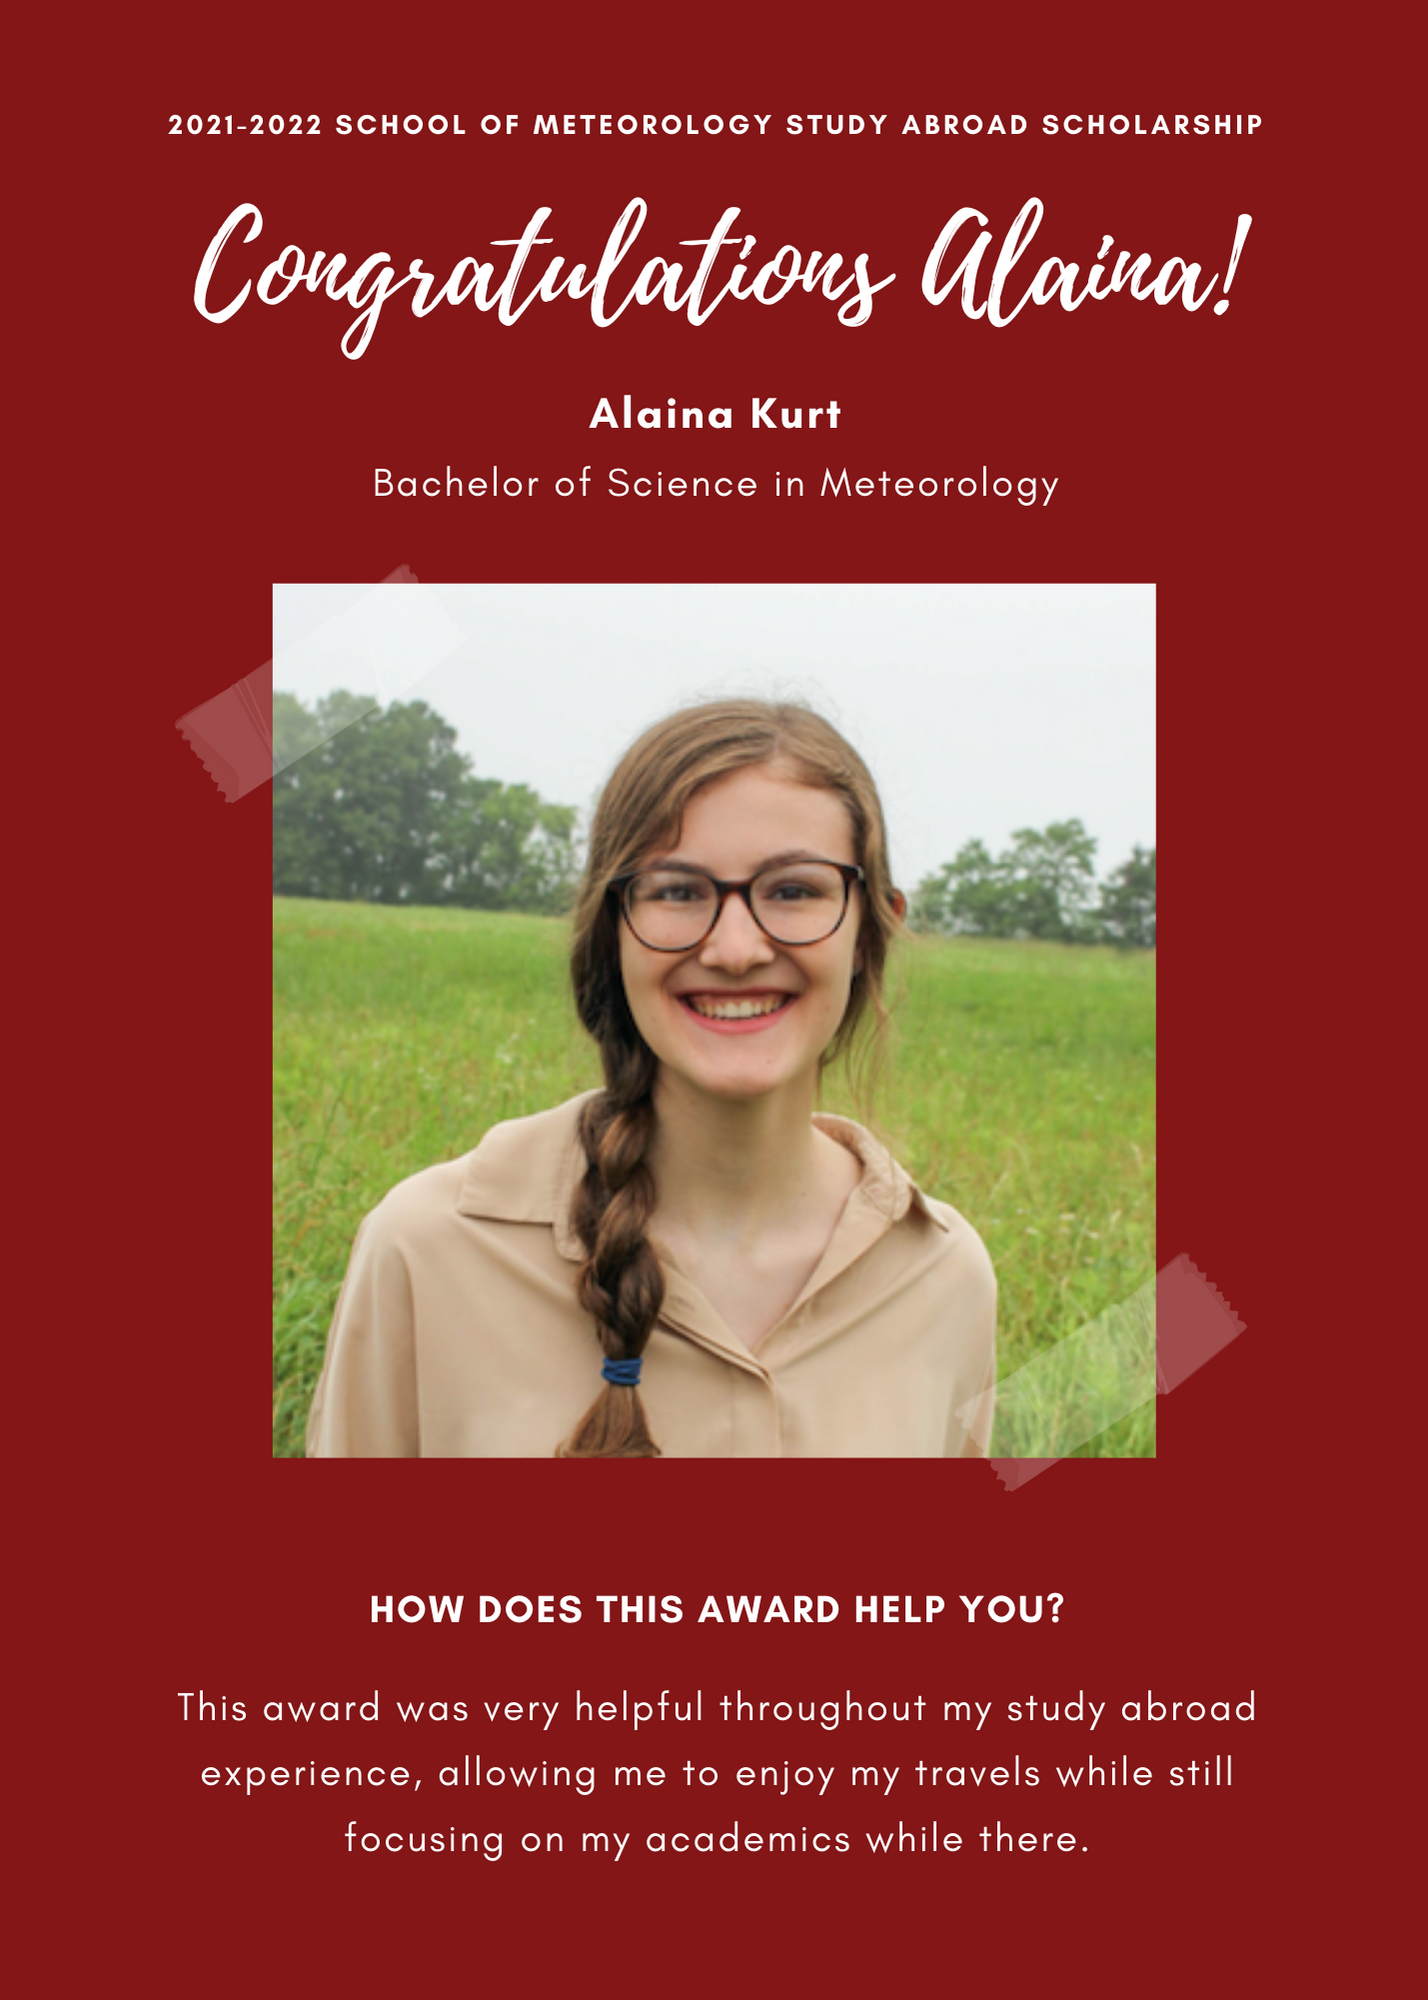 2021 -2022 A&GS SOM Study Abroad Scholarships. Congratulations Alaina! Alaina Kurt. Bachelor of Science in Meteorology. How does this award help you? This award was very helpful throughout my study abroad experience, allowing me to enjoy my travels while still focusing on my academics while there.